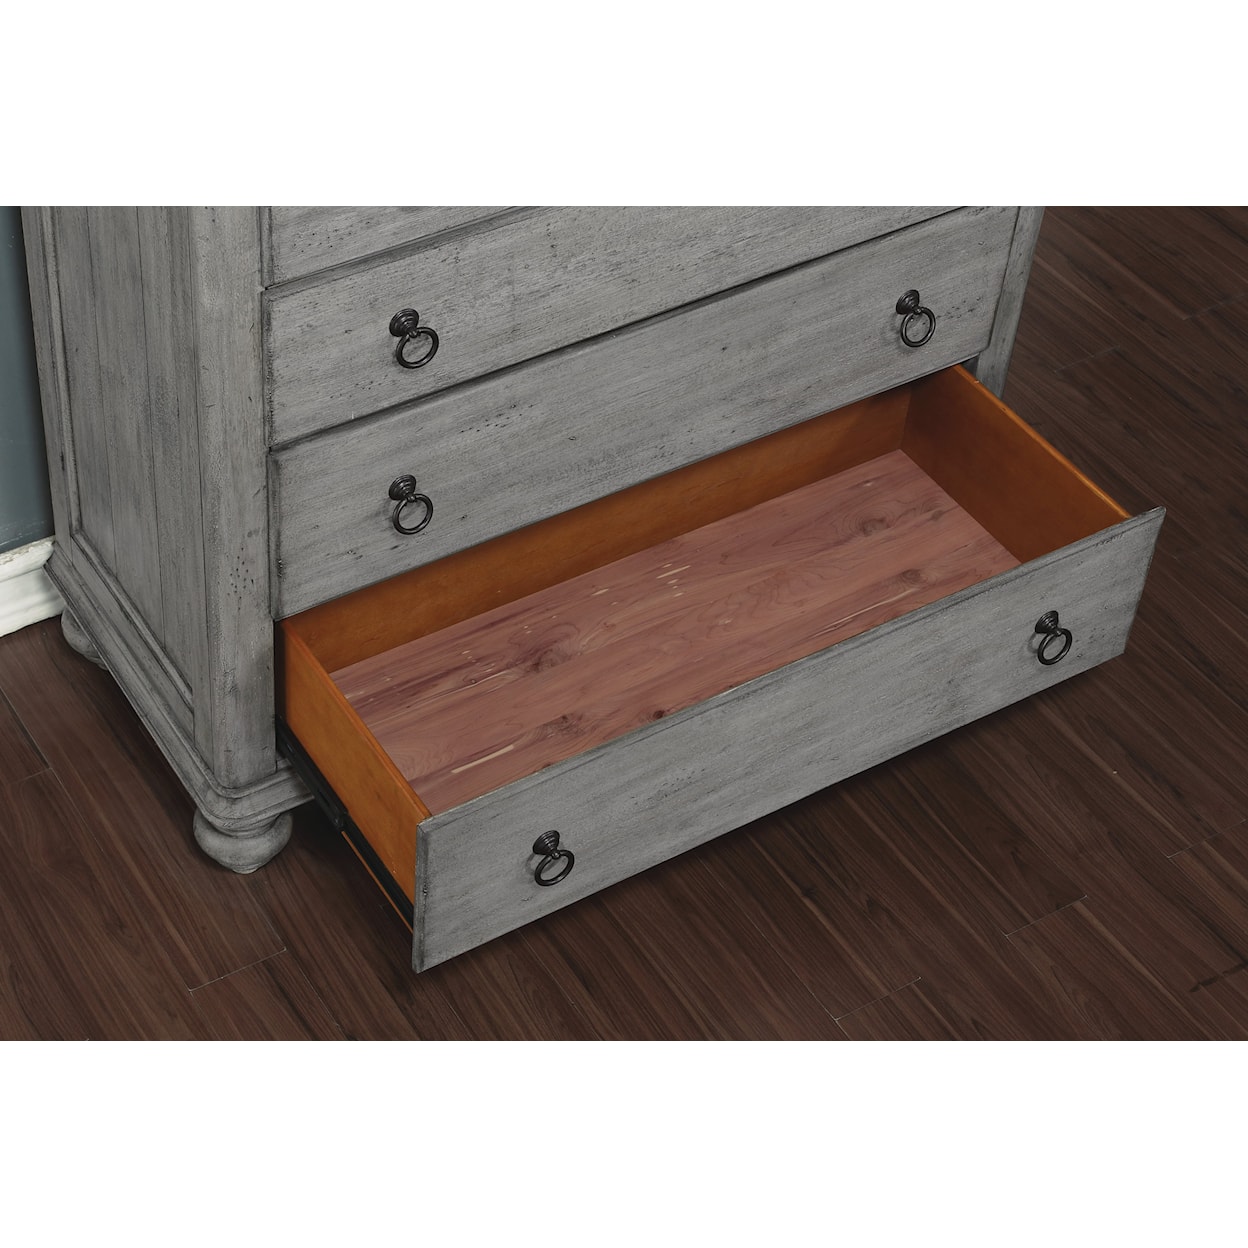 Wynwood, A Flexsteel Company Plymouth Chest of Drawers